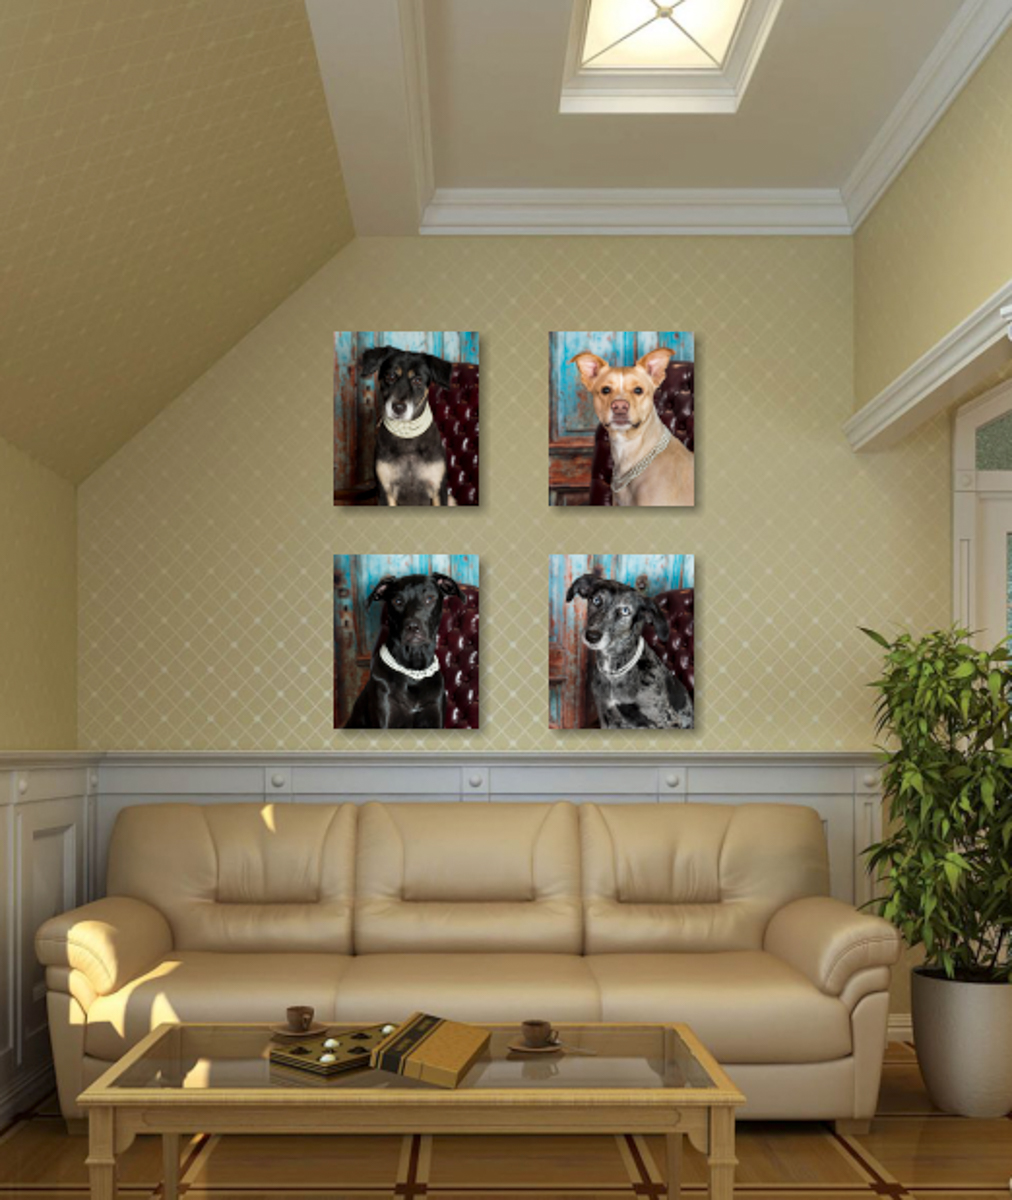 Custom Animal Portraits for your home or office.